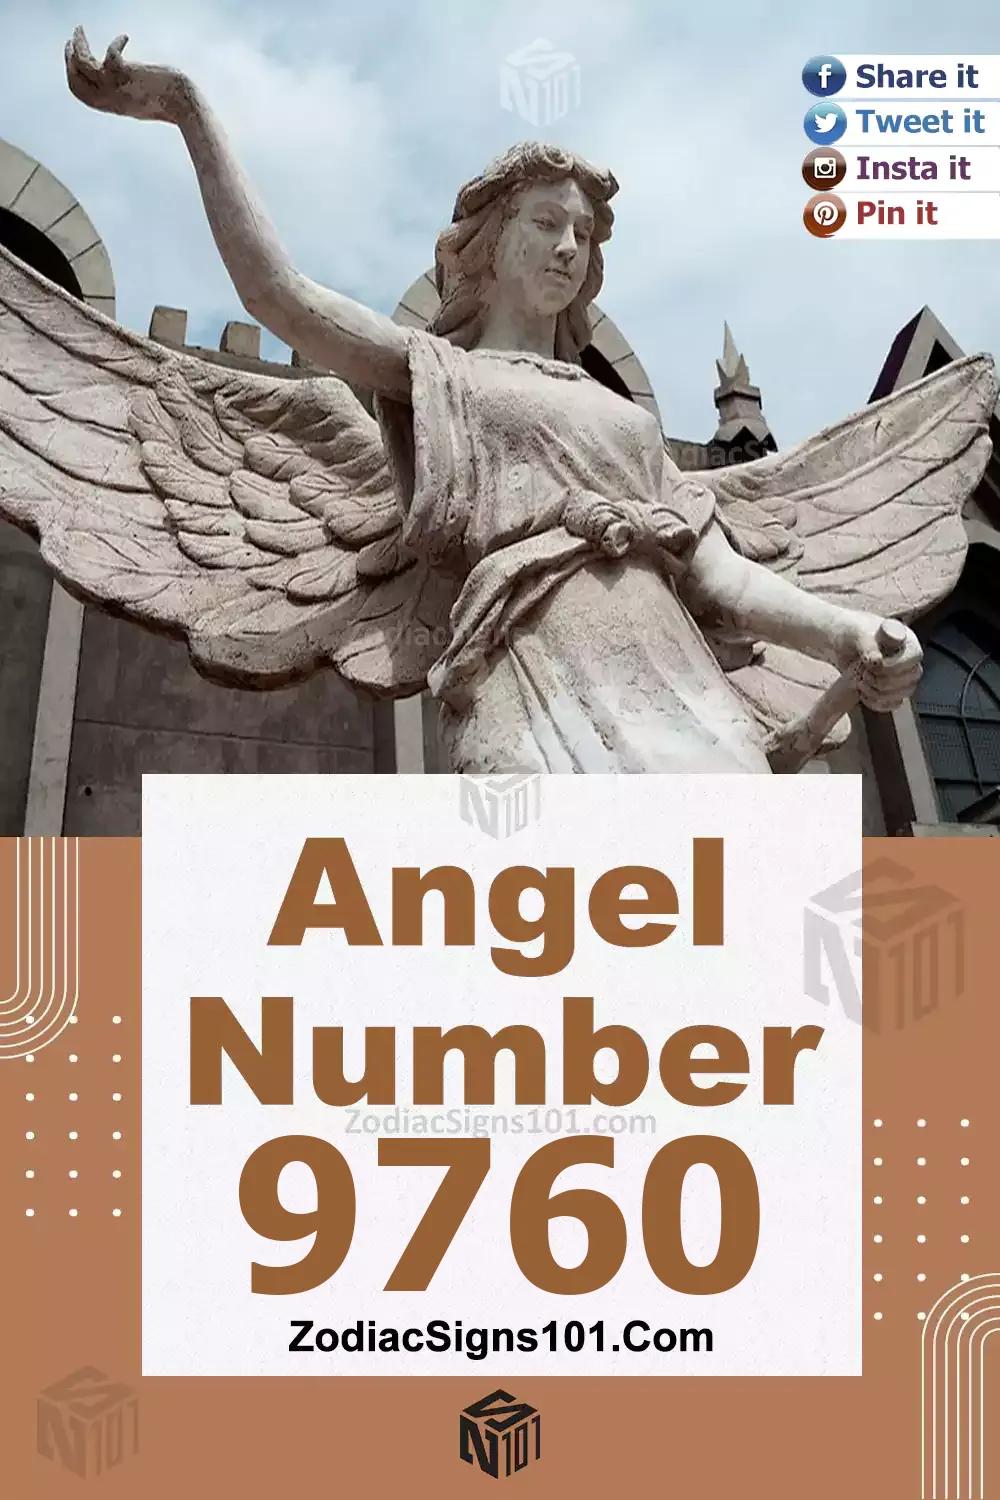 9760 Angel Number Meaning